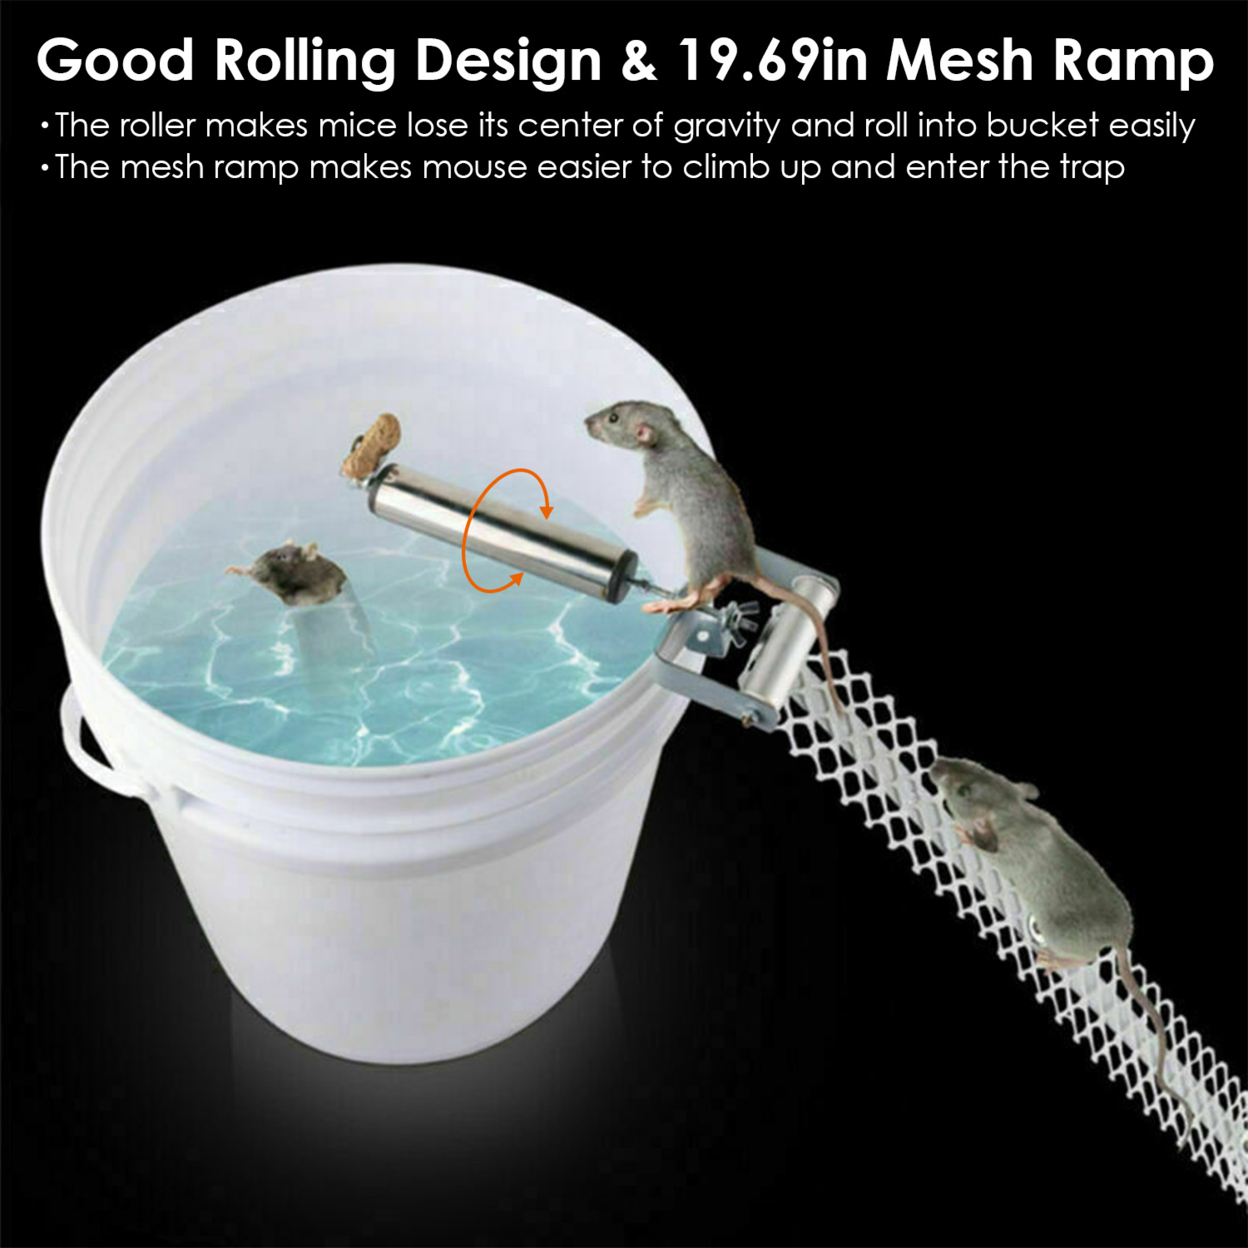 GLOBAL PHOENIX MoreGPCT3028 Reusable Mice Rat Mouse Killer Roll Trap Log  Rolling Mouse Catcher Rodent Traps Mouse Control 19.69in Mesh Ramp For Mice  Rats